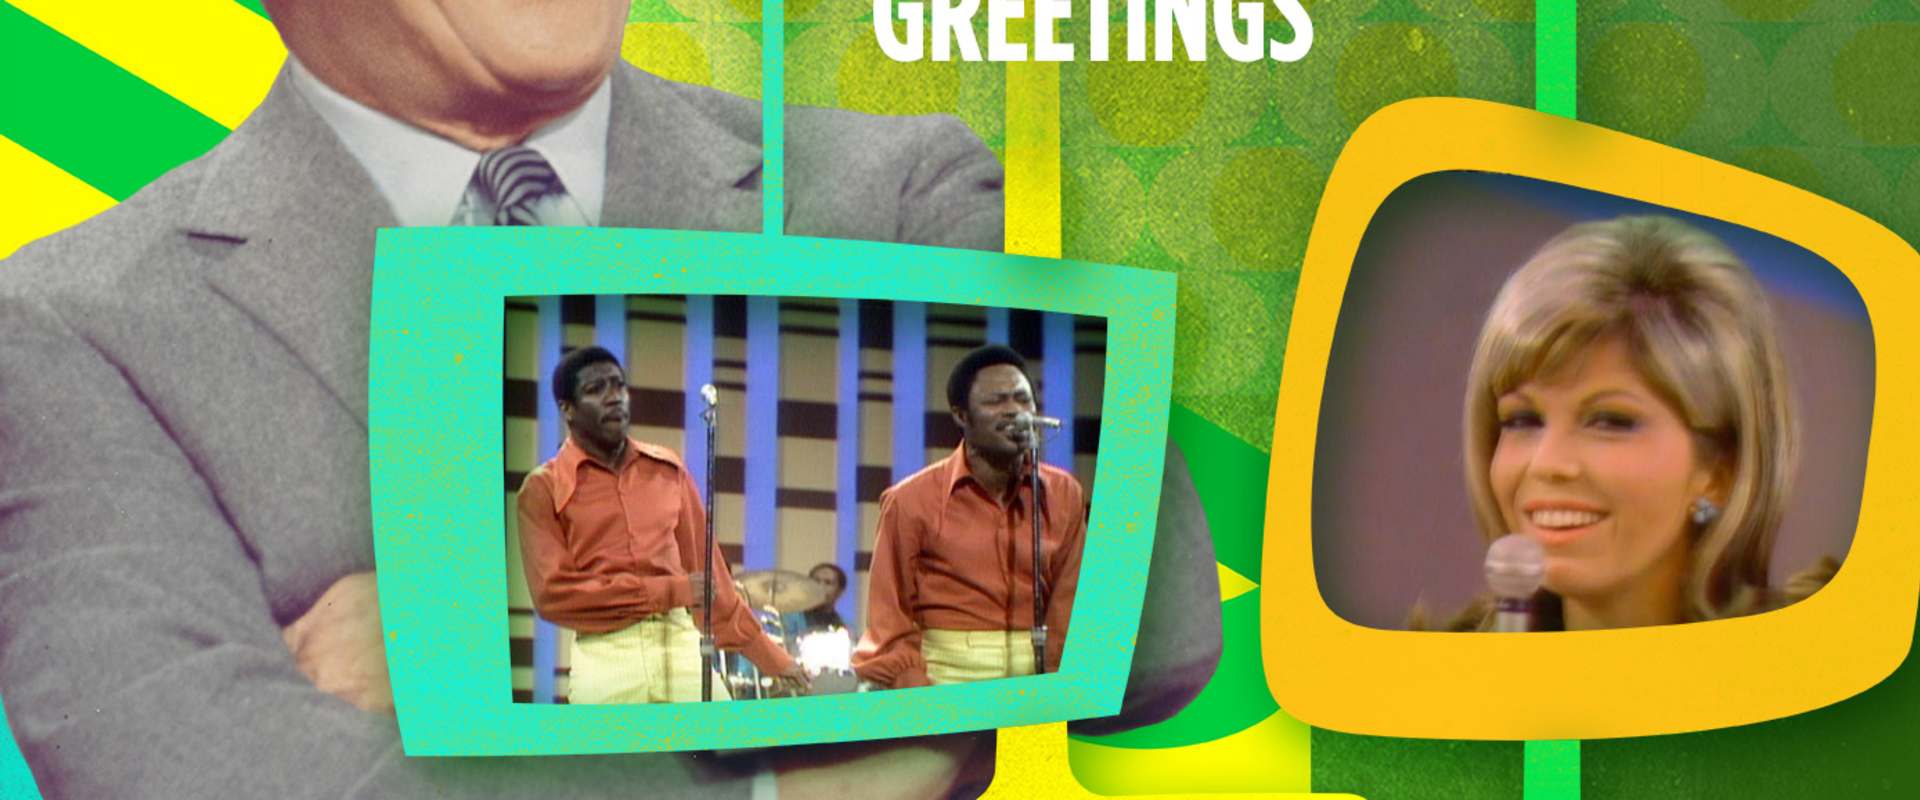 Holiday Greetings from 'The Ed Sullivan Show' background 1